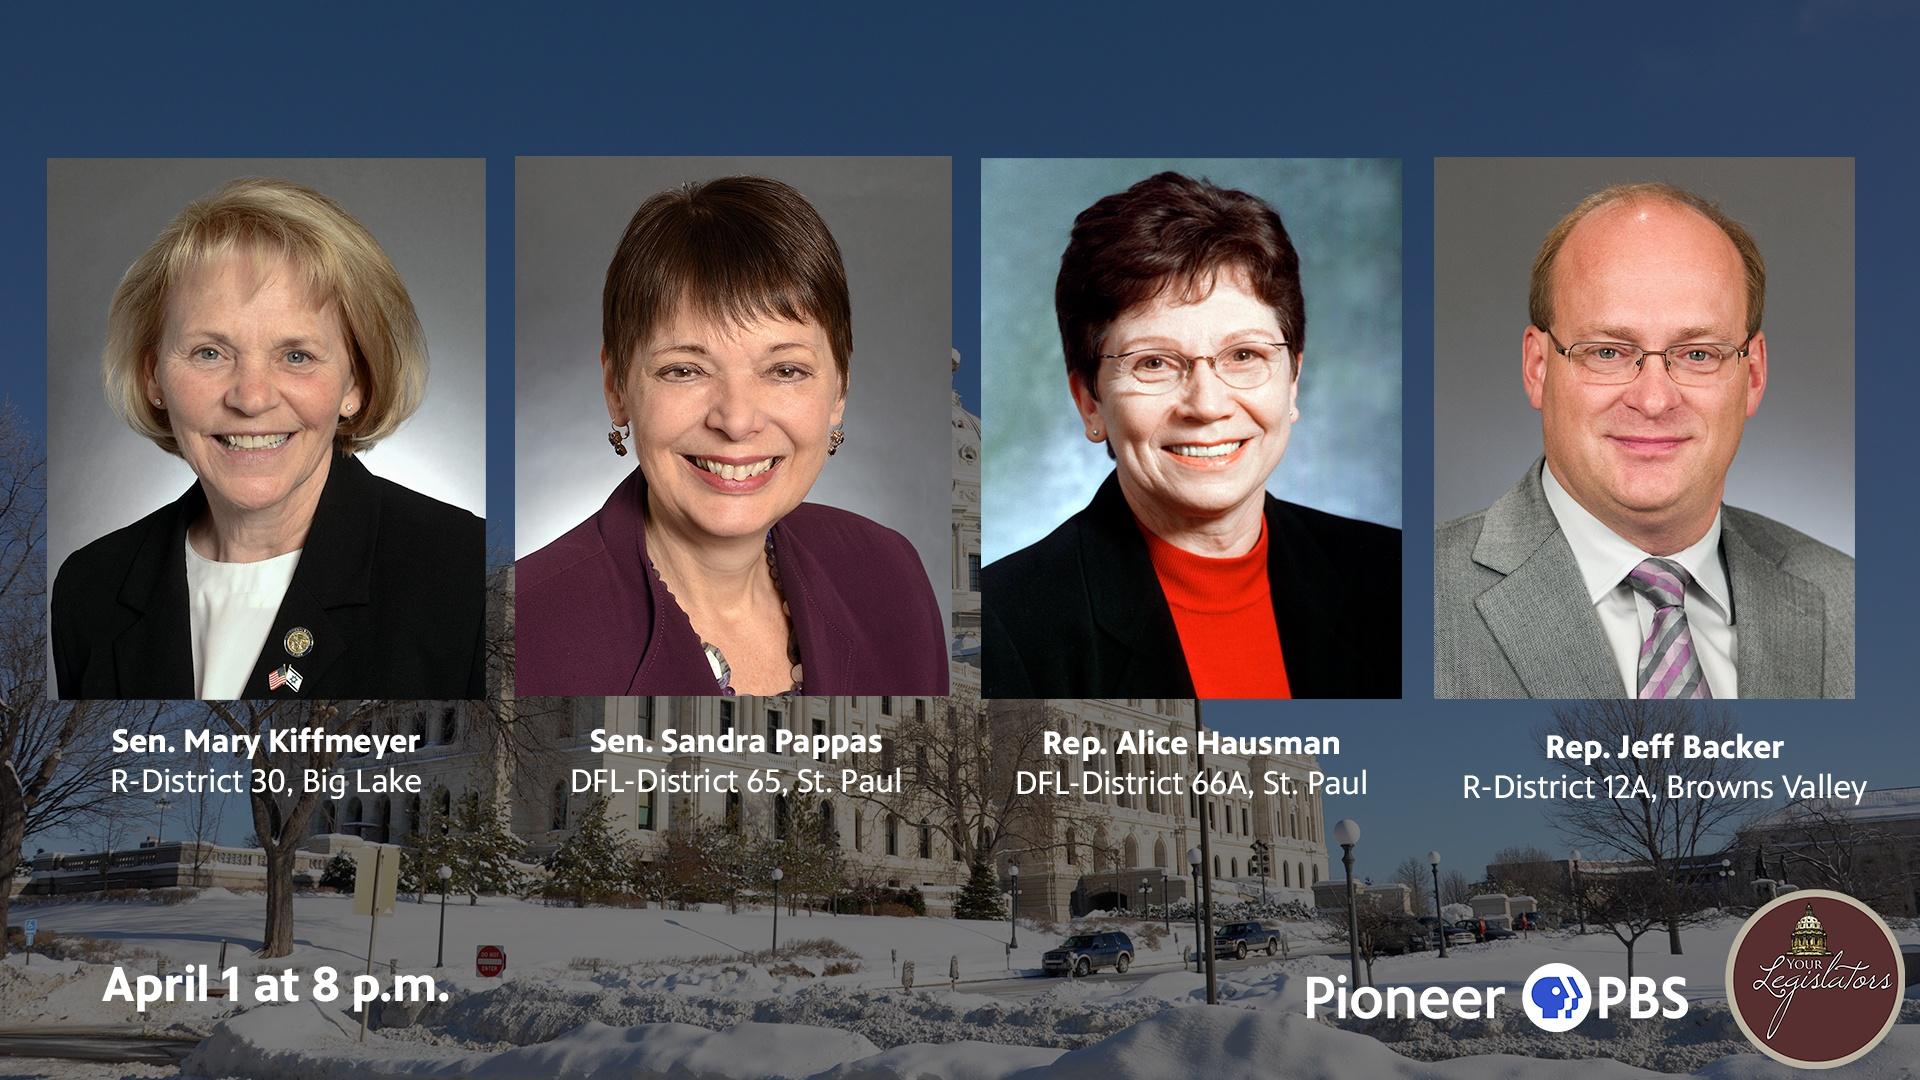 A photo of Download a photo of Sen. Mary Kiffmeyer (R), Sen. Sandra Pappas (DFL) District 65, Rep. Alice Hausman (DFL) District 66A and Rep. Jeff Backer (R) District 12A.